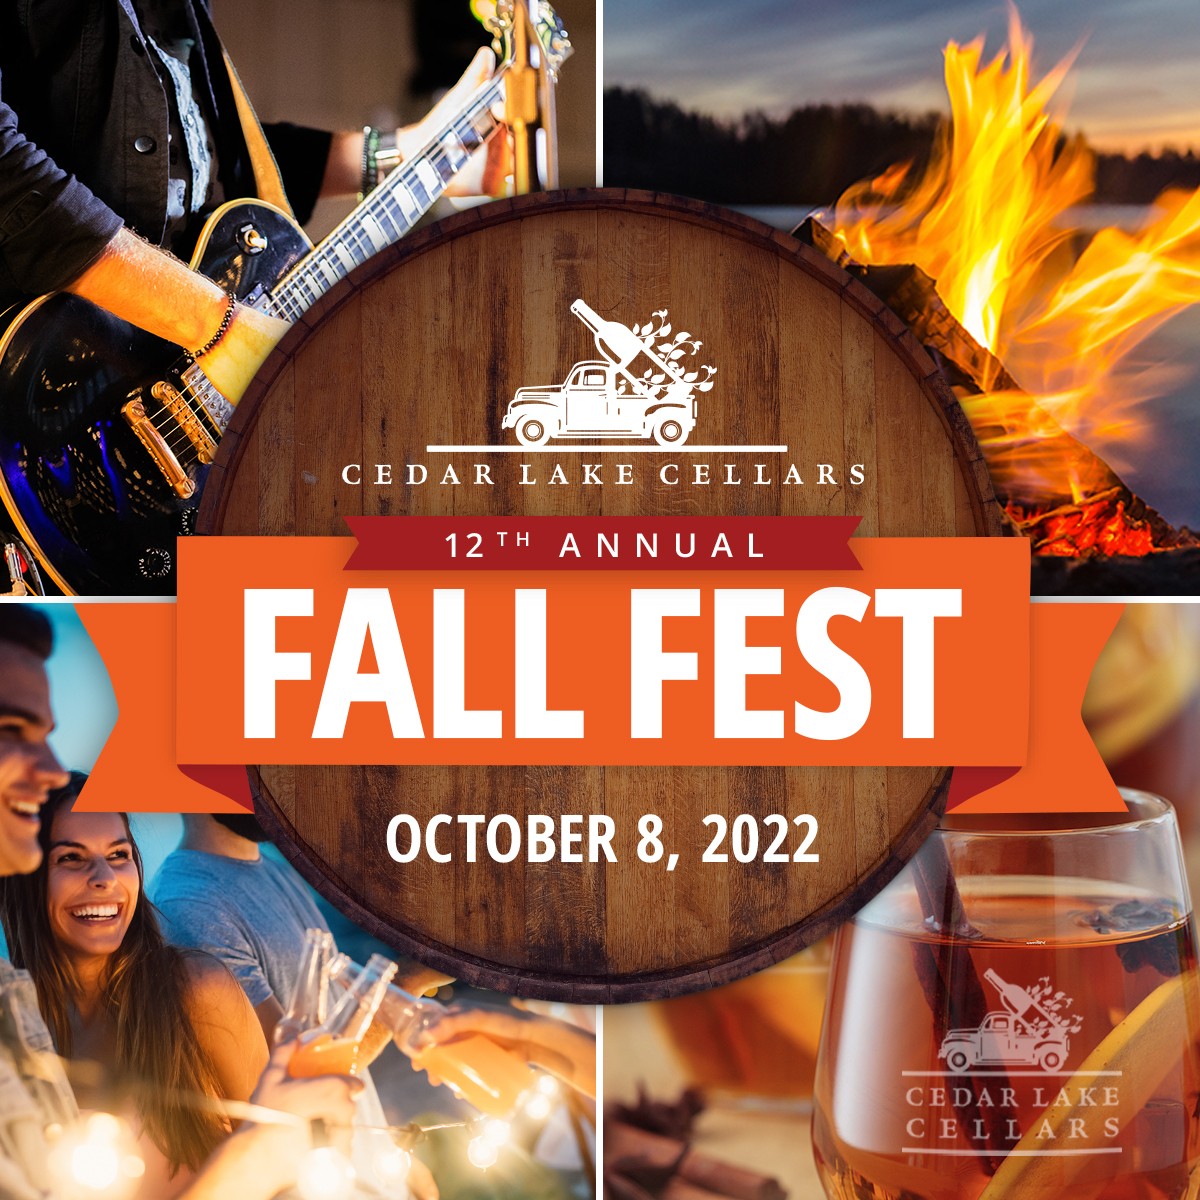 Bring your friends and join us for our 12th annual Fall Fest event on Saturday, October 8th!